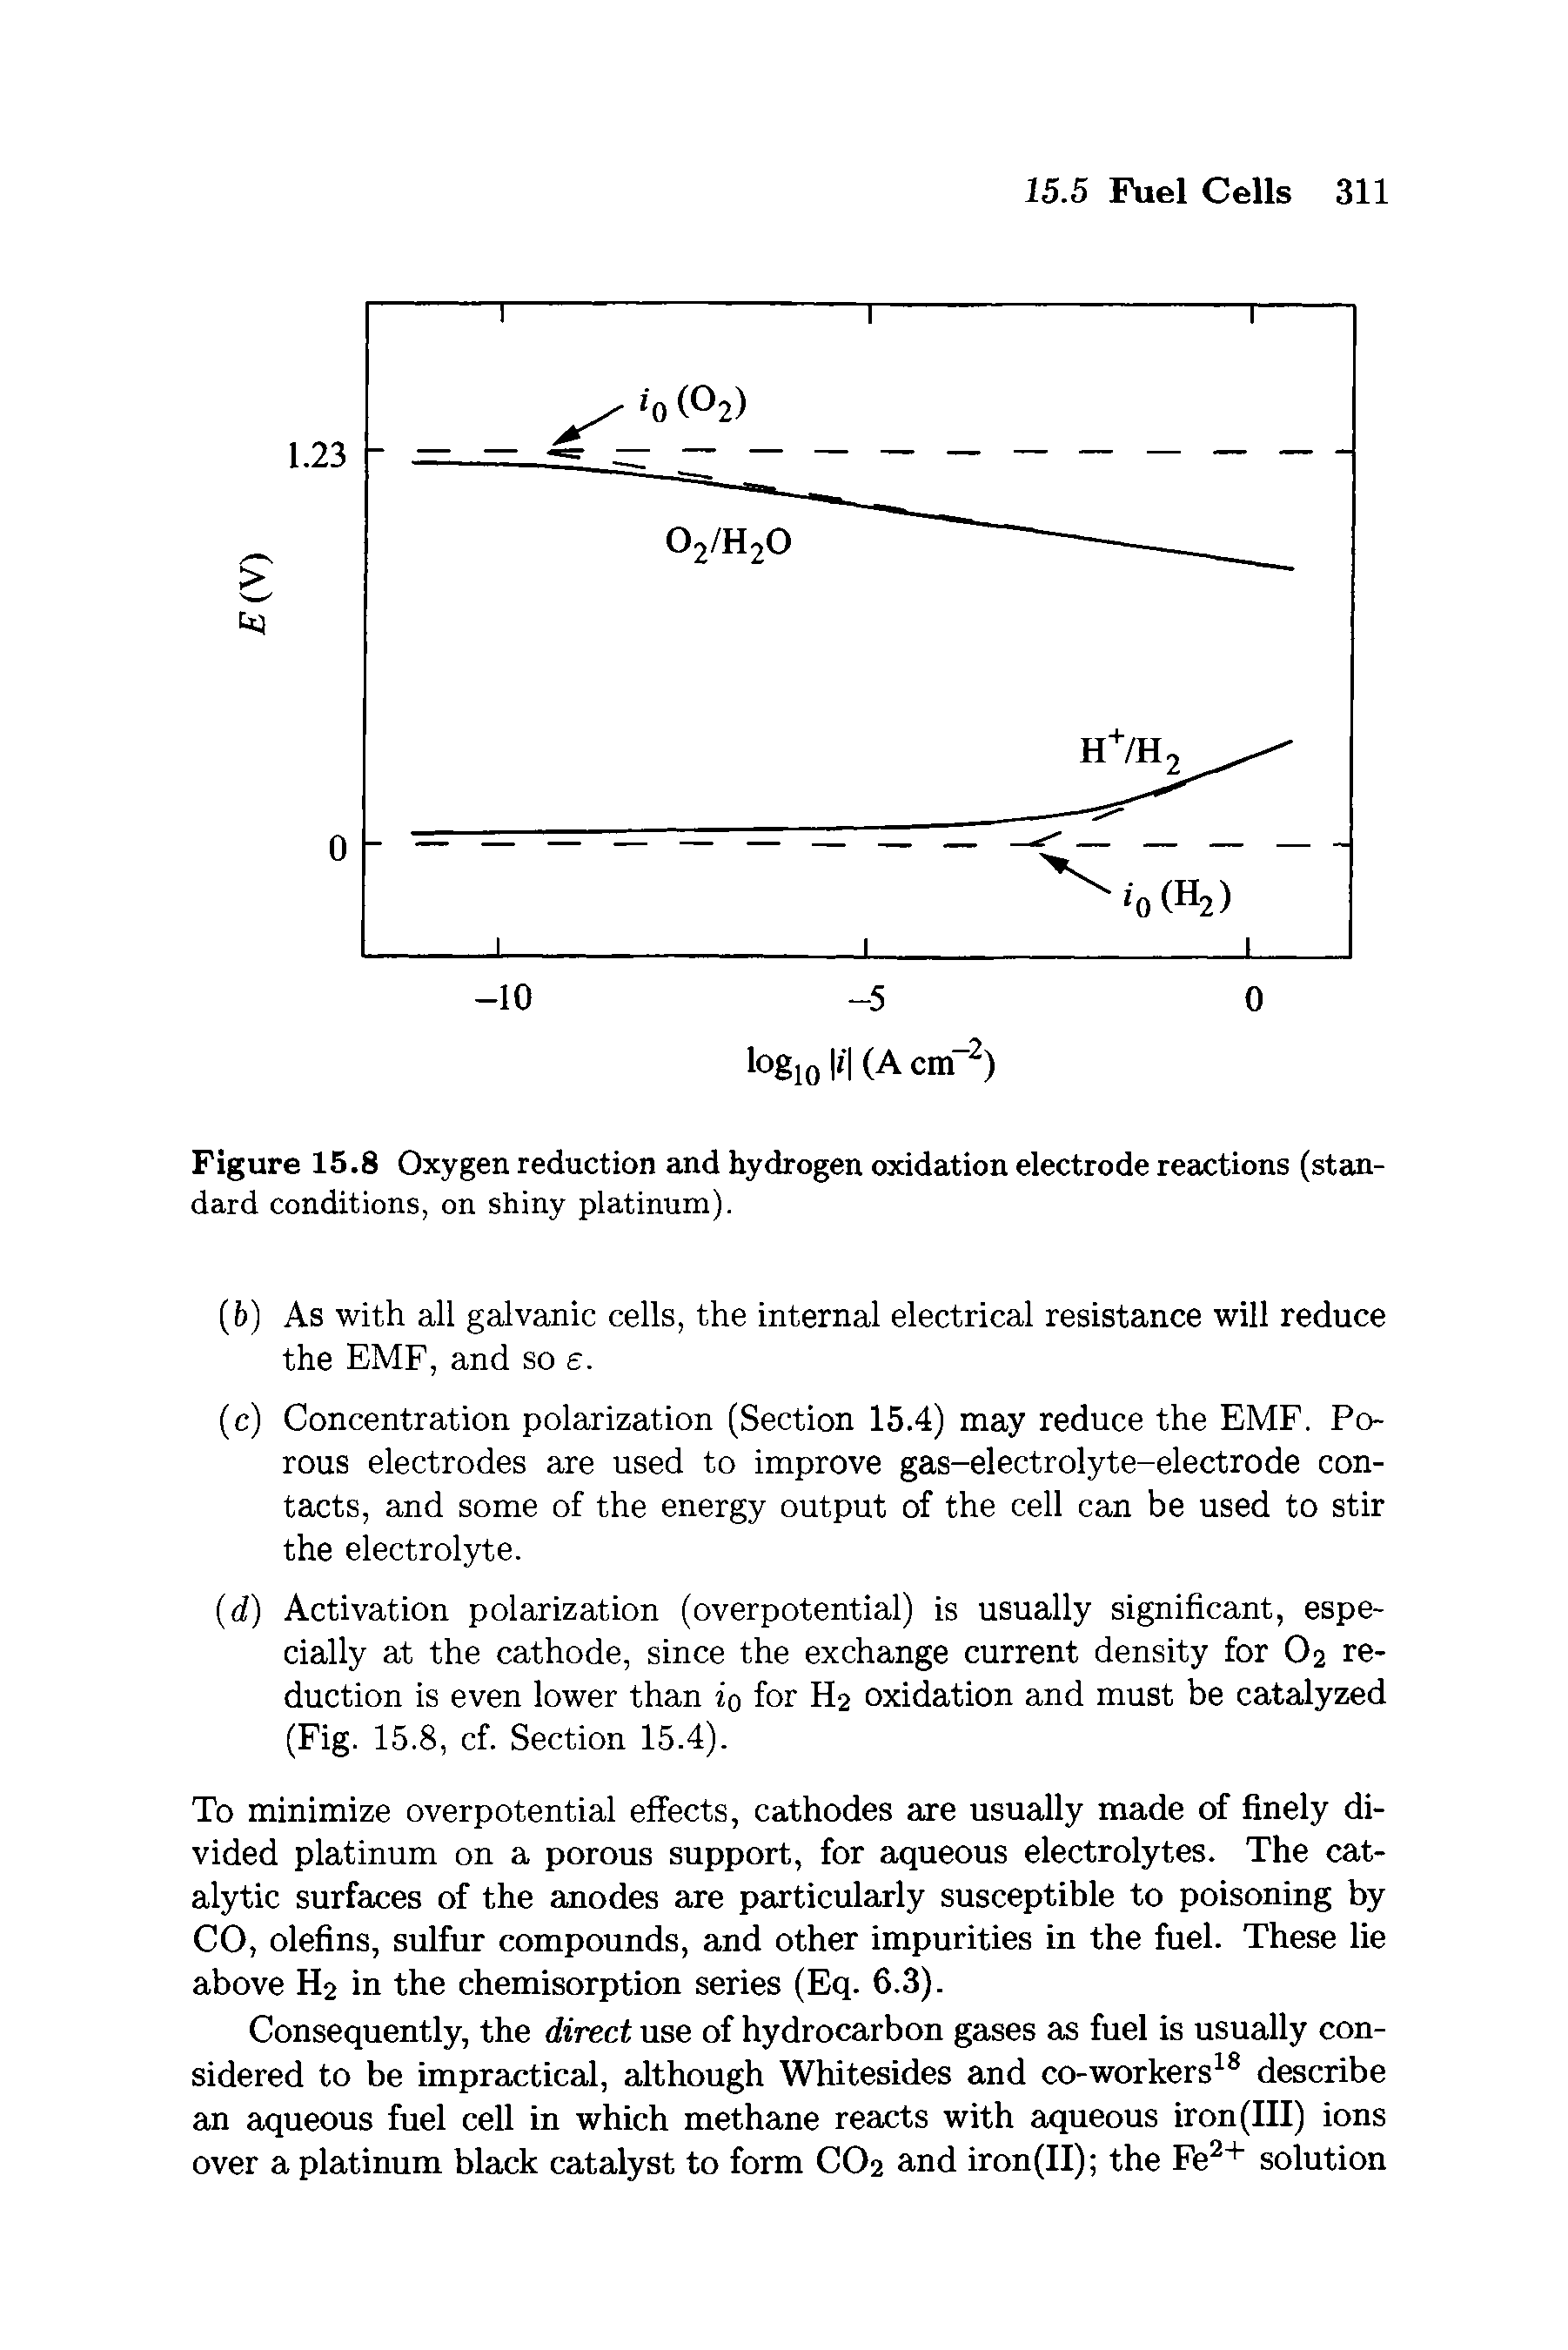 Figure 15.8 Oxygen reduction and hydrogen oxidation electrode reactions (standard conditions, on shiny platinum).